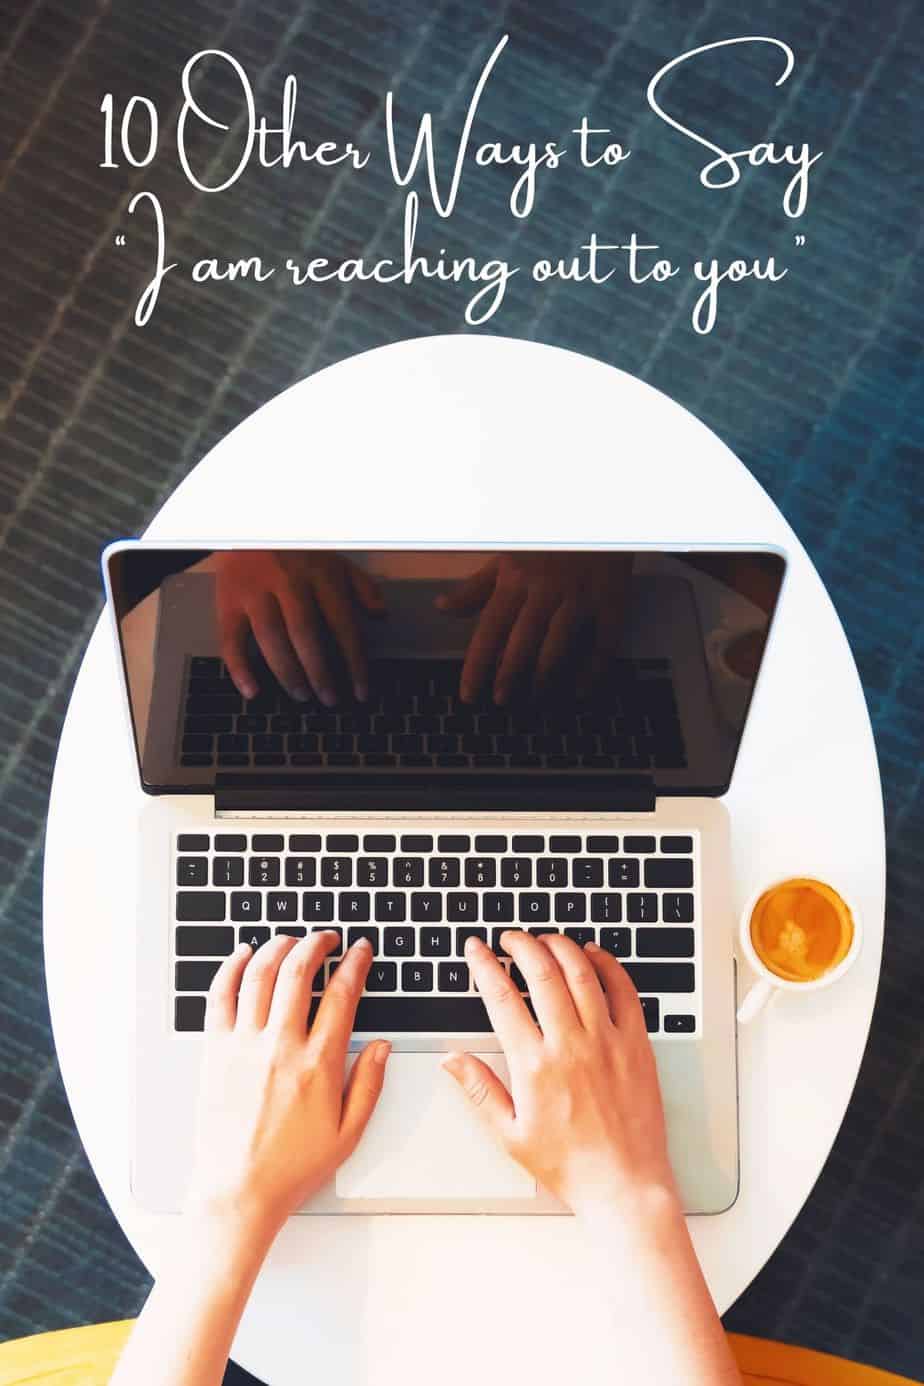 10 Other Ways to Say “I am reaching out to you”